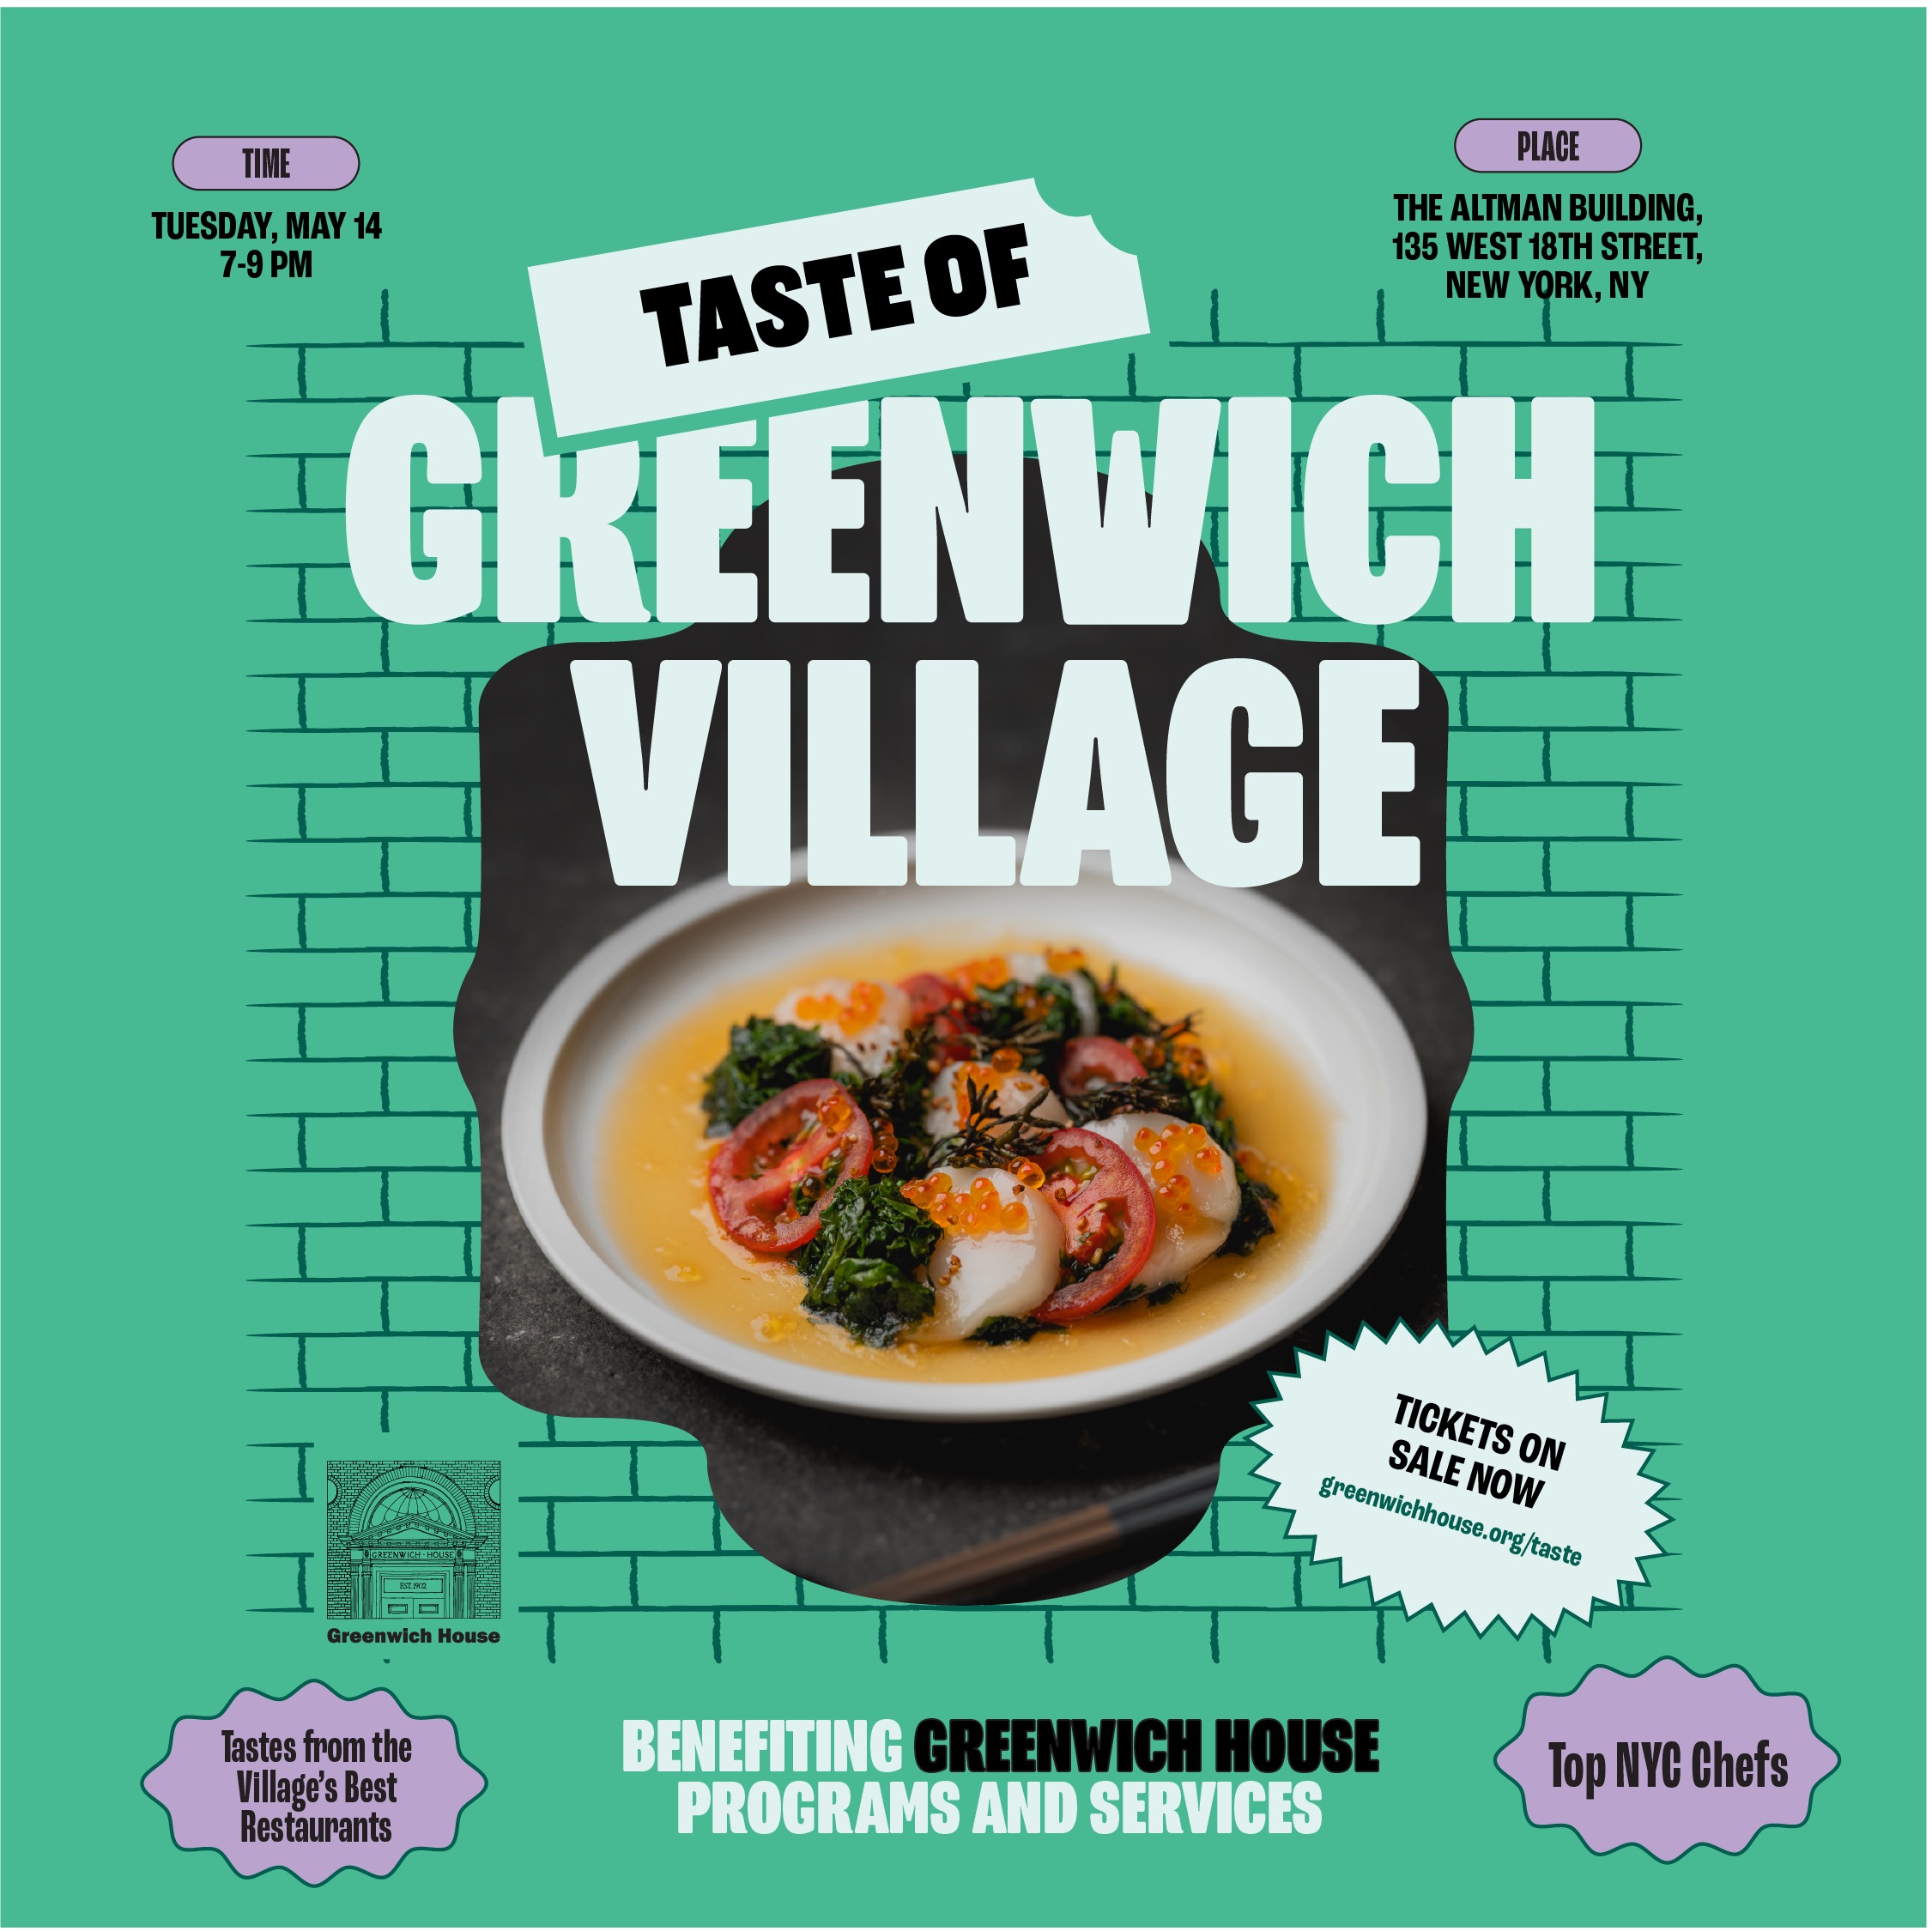 Flyer for Taste of Greenwich Village, featuring a dish of soup and caviar